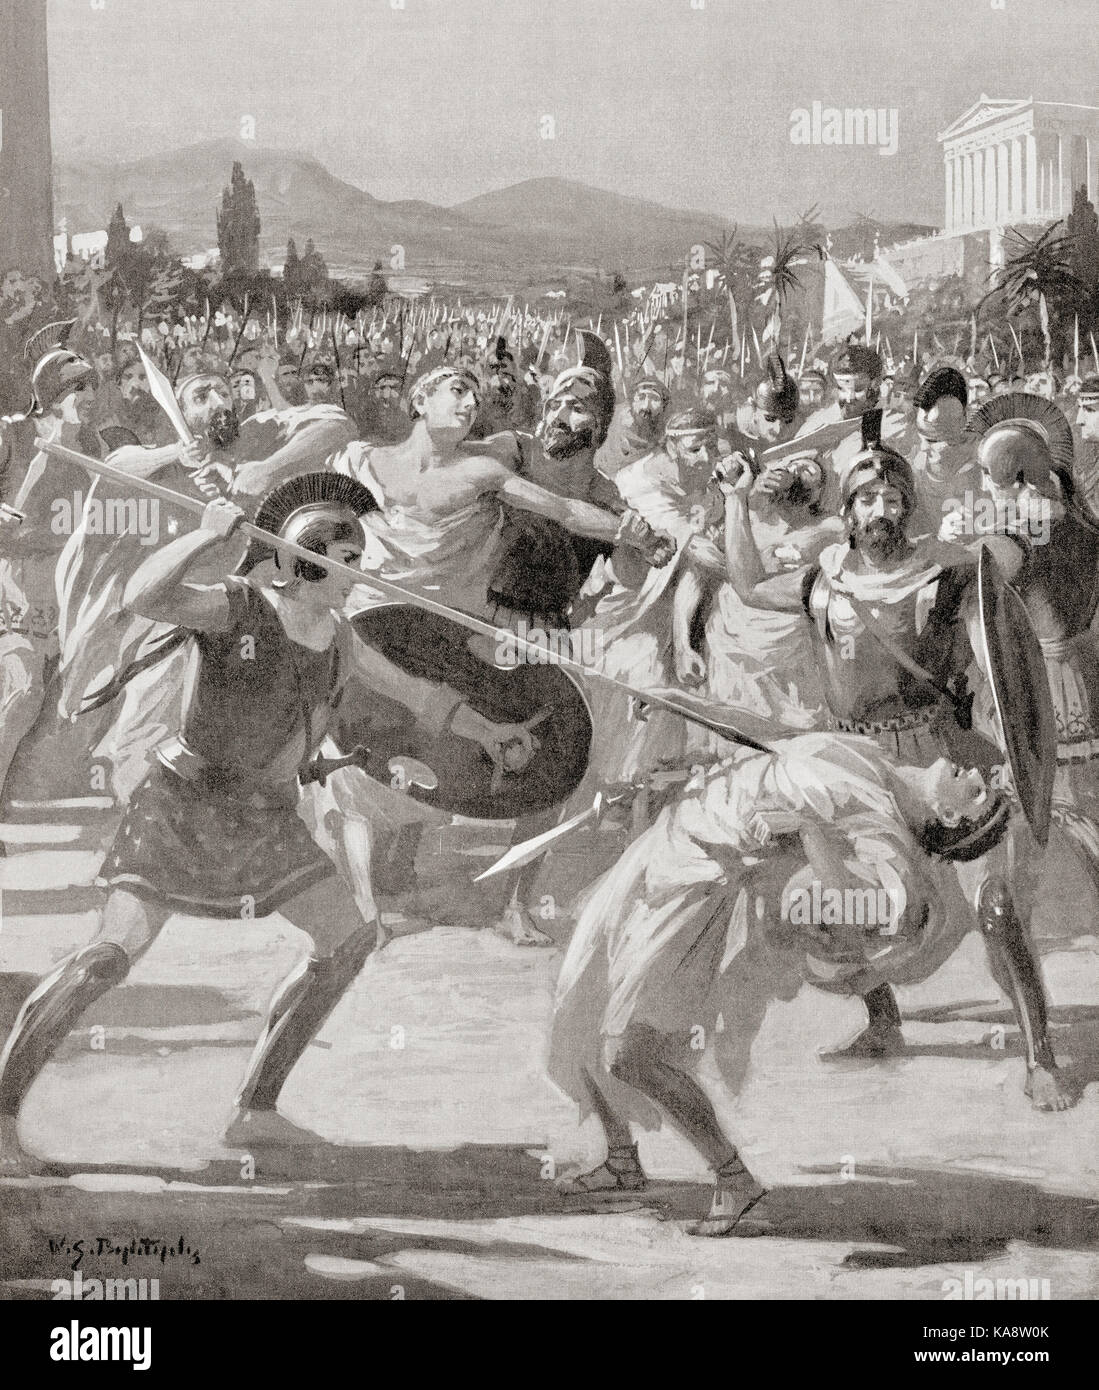 The assassination of Hipparchus or Hipparch by the tyrannicides, Harmodius and Aristogeiton in 514 BC.  Hipparchus, died 514 BC, a member of the ruling class of Athens. He was one of the sons of Peisistratos and a tyrant of the city of Athens from 528/7 BC until his assassination.  After the painting by W.S. Bagdatopoulus, (1888-1965).  From Hutchinson's History of the Nations, published 1915. Stock Photo